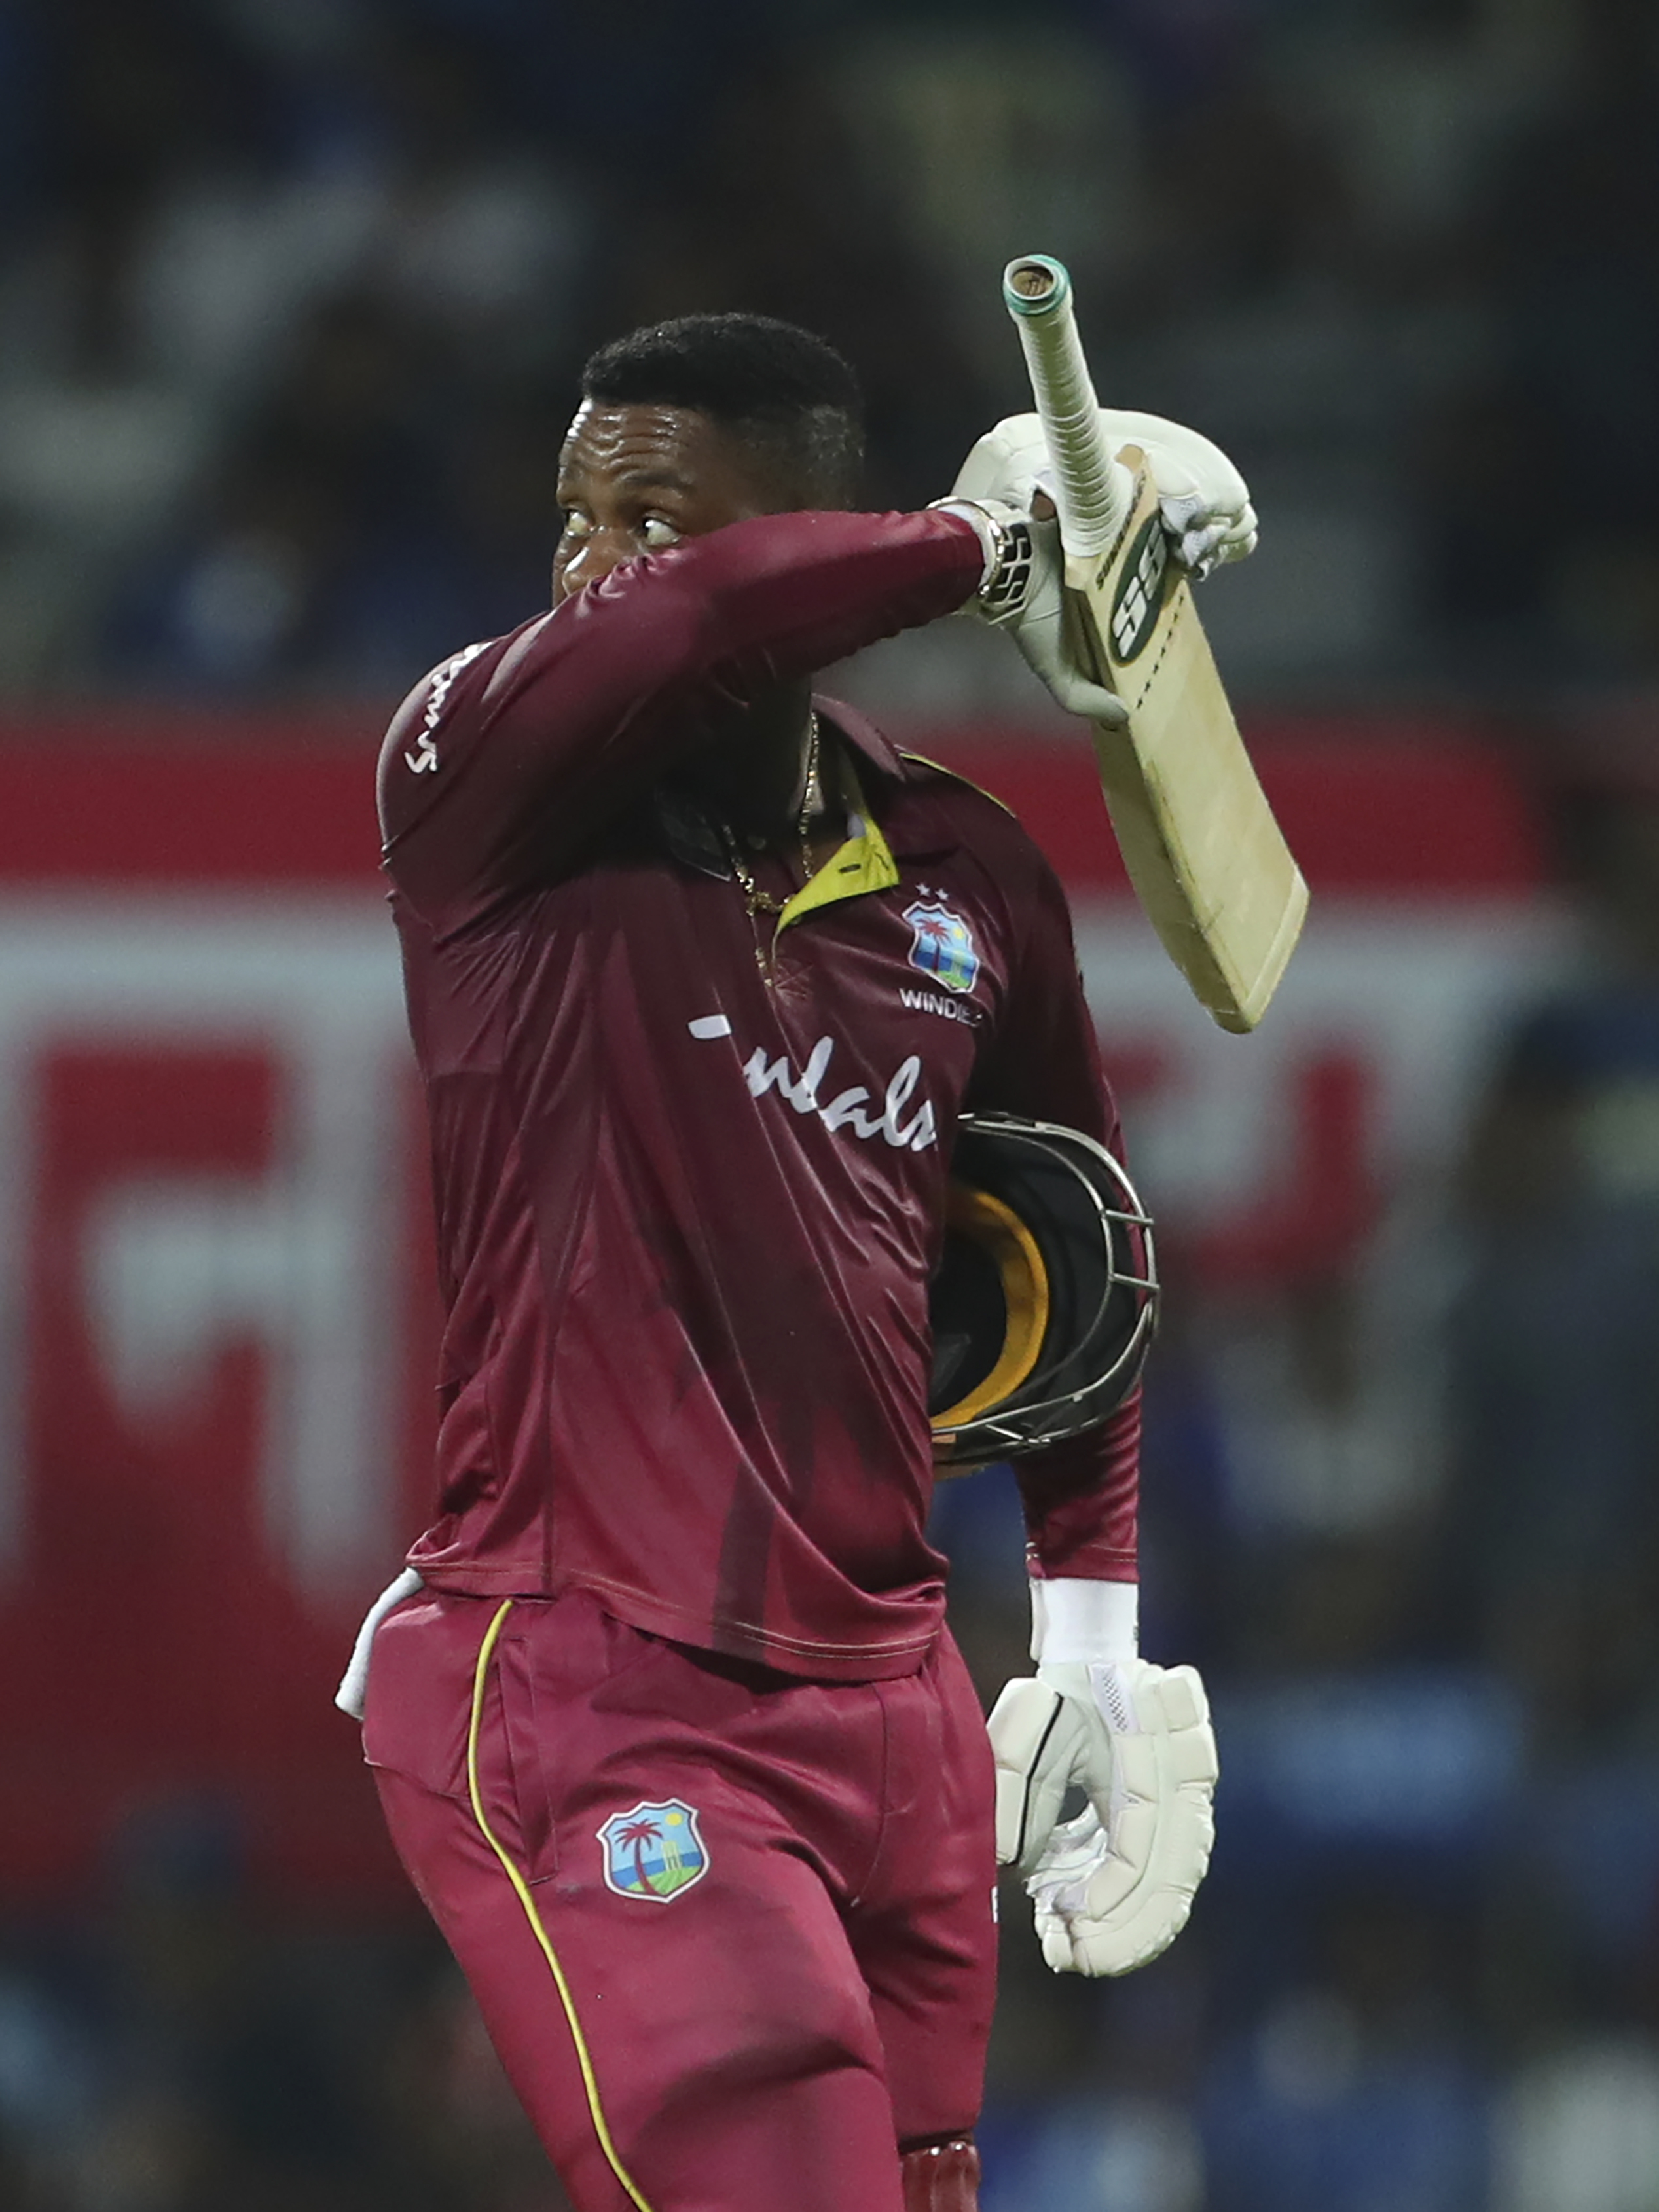 Shimron Hetmyer looks back to watch the replay of his dismissal as he leaves the field during the first one day international cricket match between India and West Indies in Chennai, India, on December 15, 2019